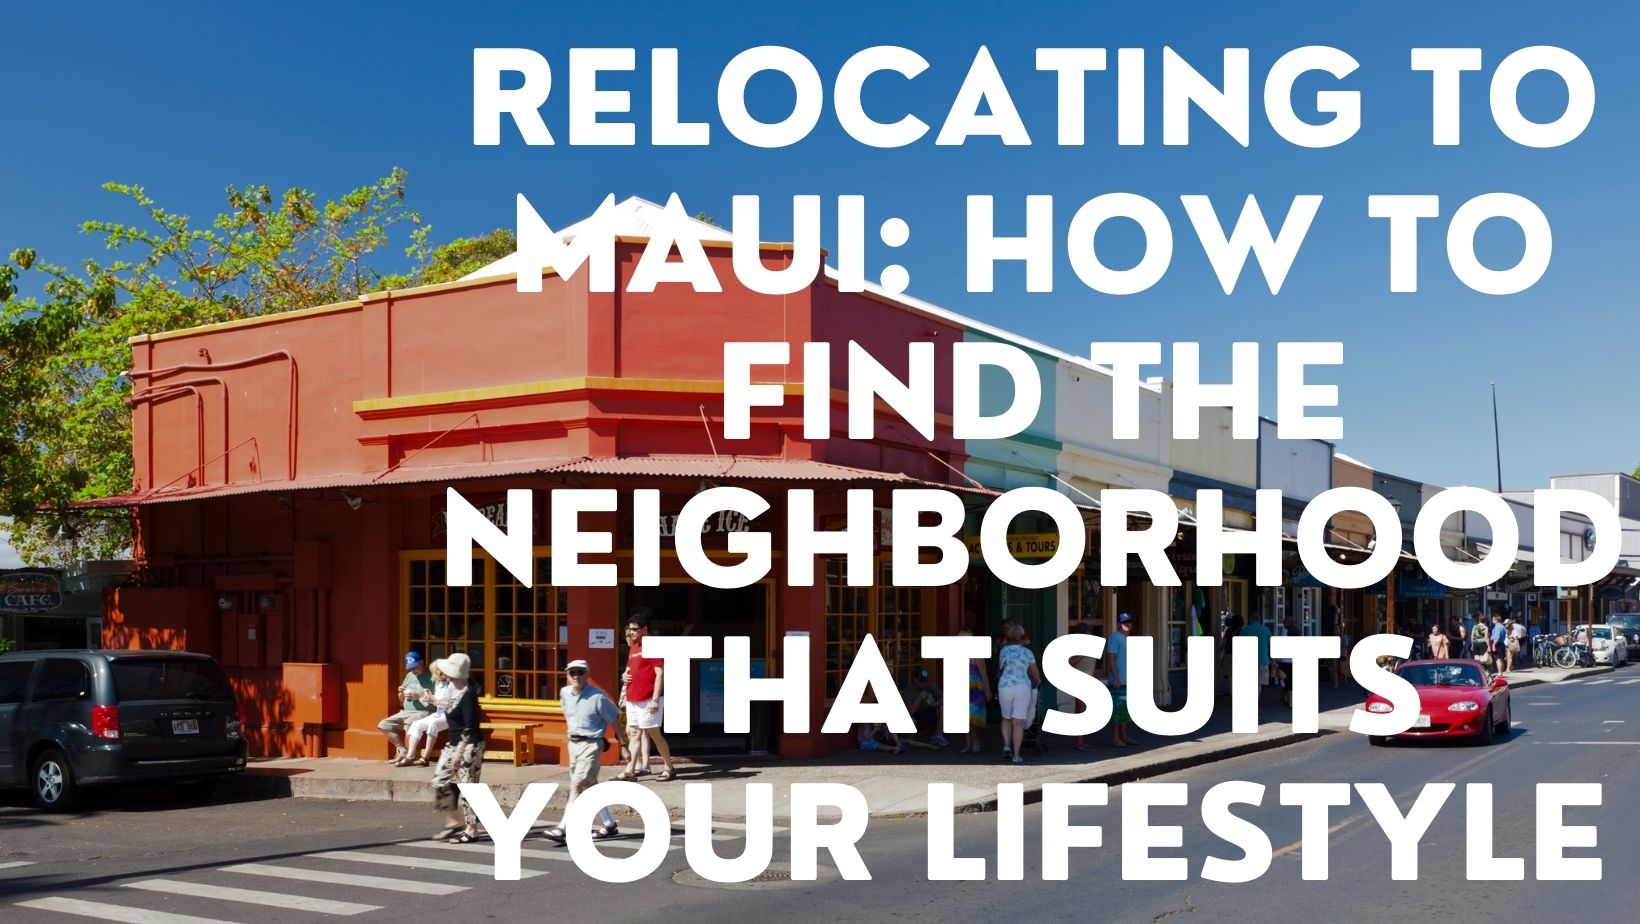 Relocating to Maui: How to Find the Neighborhood That Suits Your Lifestyle